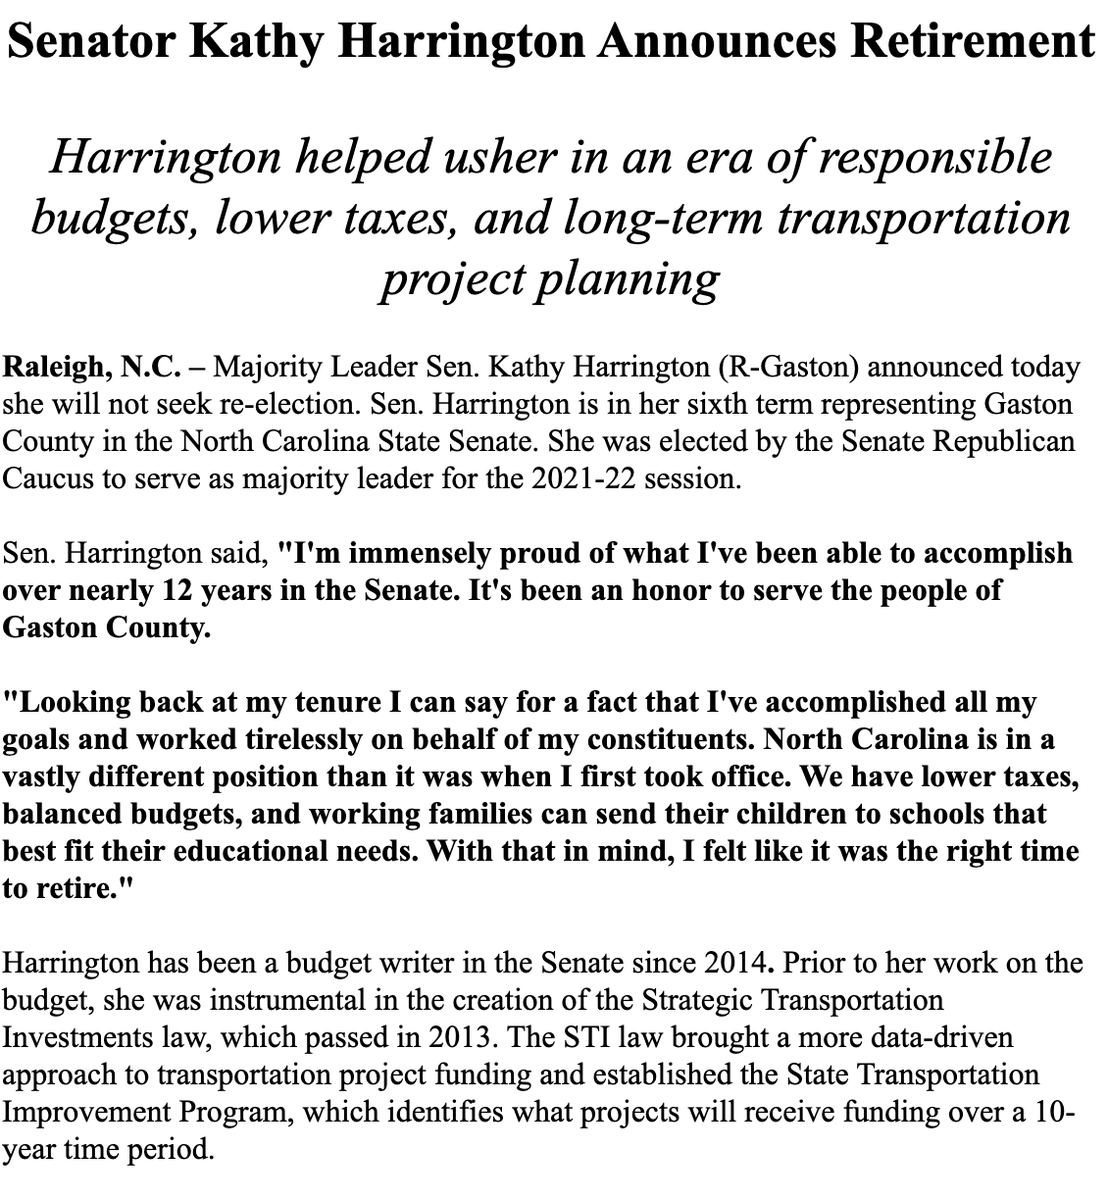 Big #ncga news just announced: Sen. Kathy Harrington is calling it quits. Easily one of the most powerful Republican lawmakers, but you don't hear much about her because she typically doesn't do interviews #ncpol